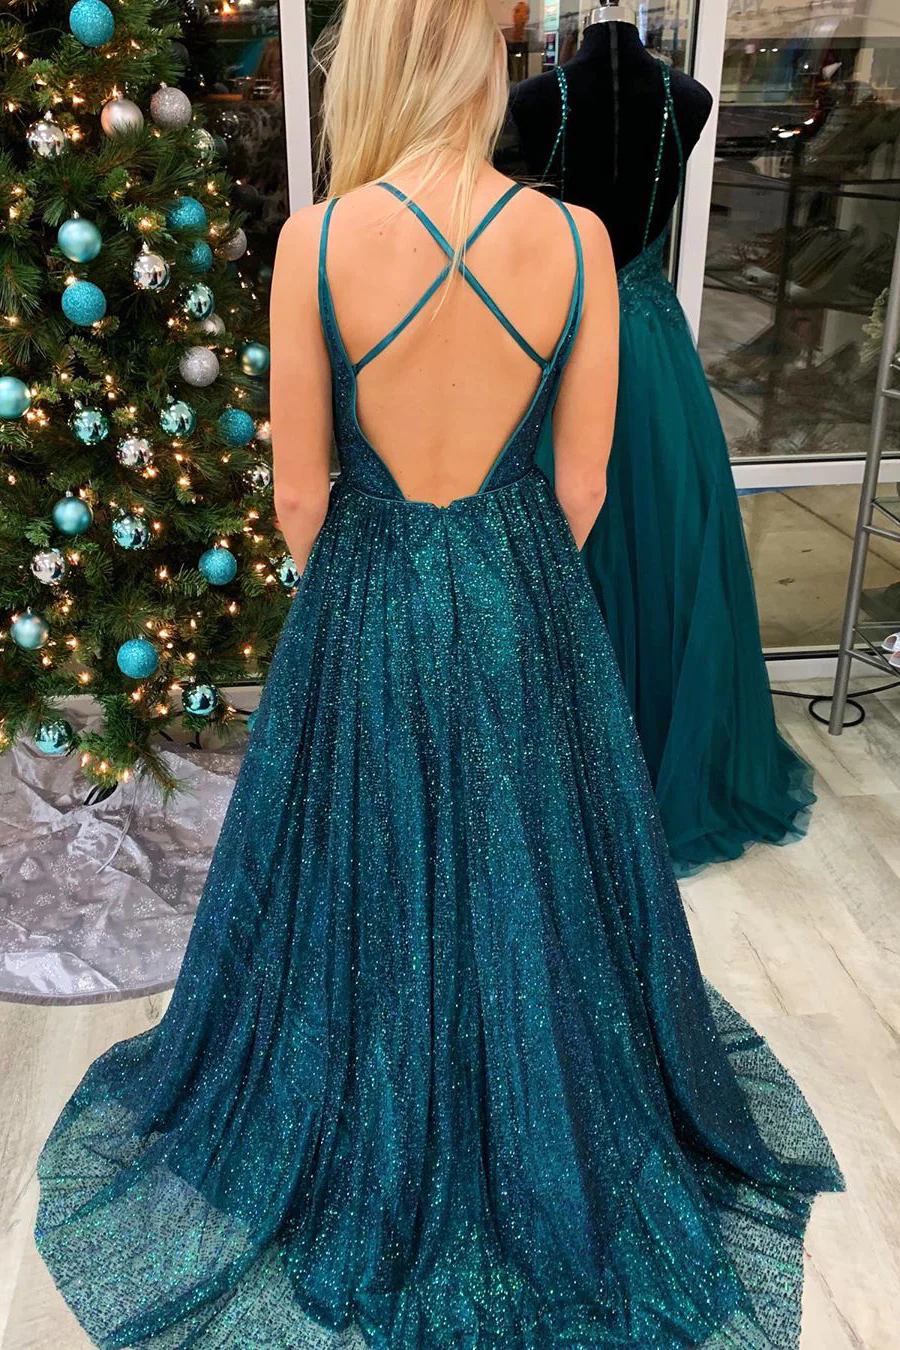 Glitter A-Line Teal Long Prom Dress with Spaghetti Straps nv704